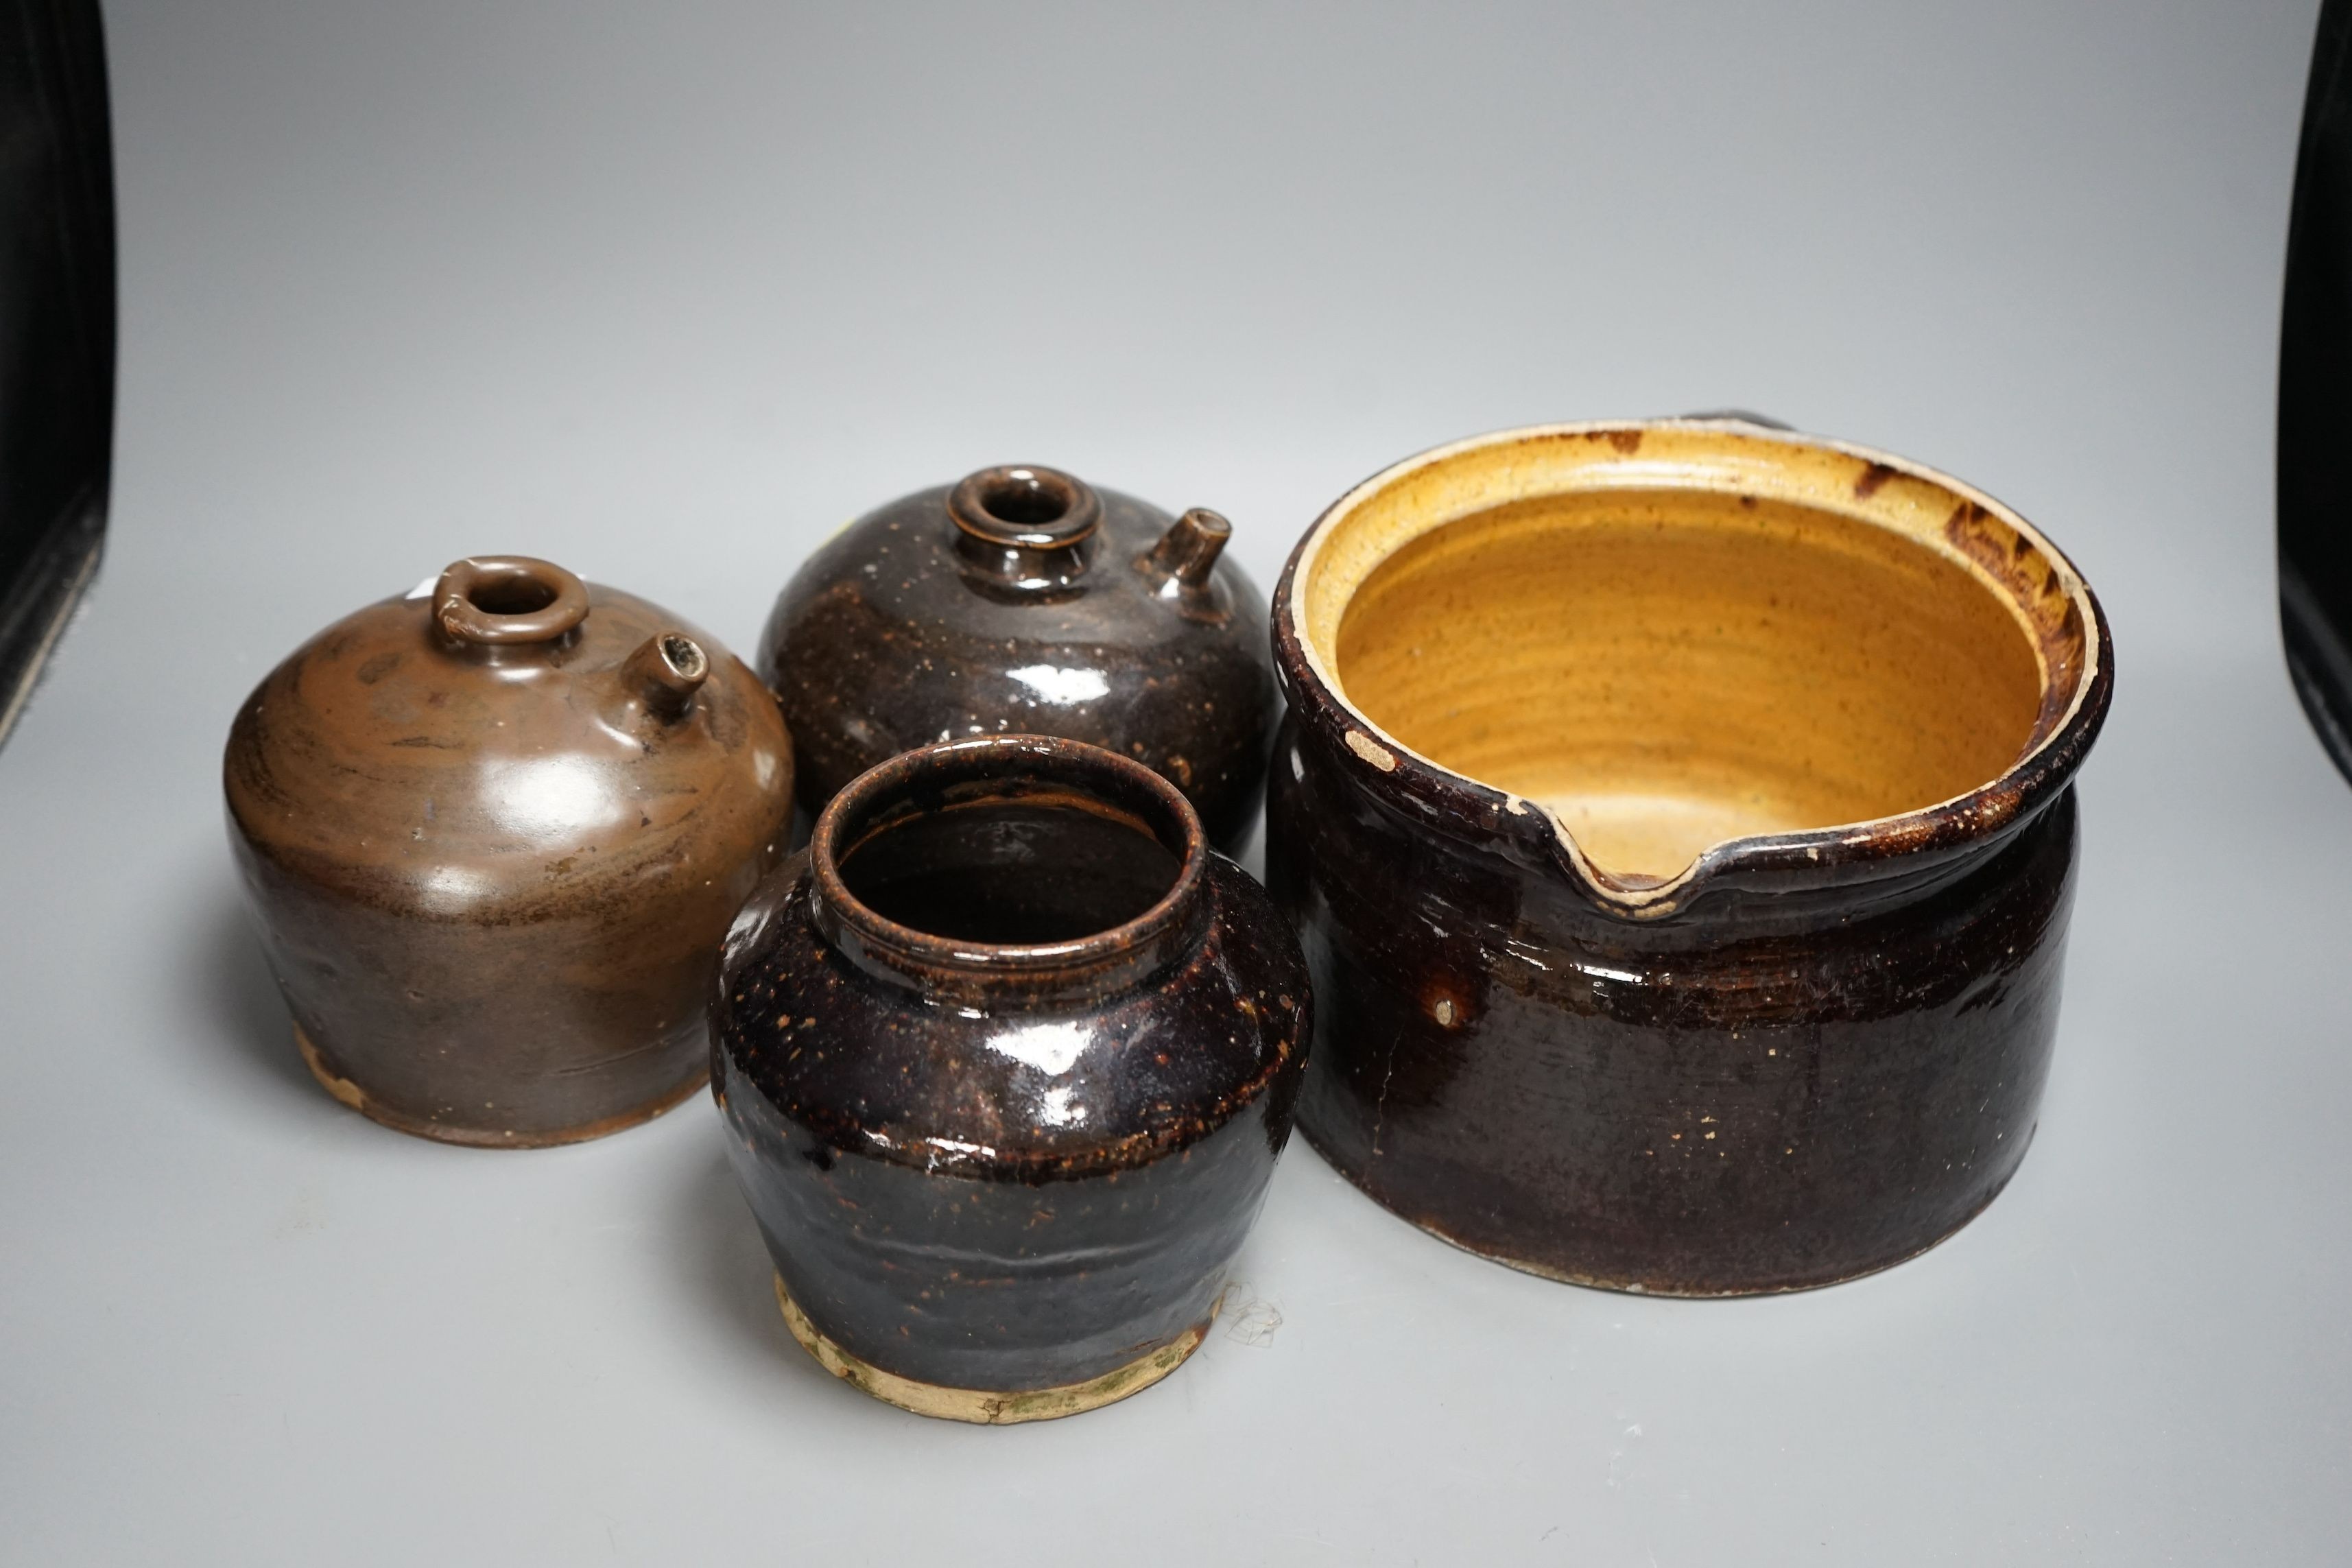 Two 19th century Chinese tenmoku glazed soy sauce jars, a similar jar and a pouring vessel, largest 14cm tall